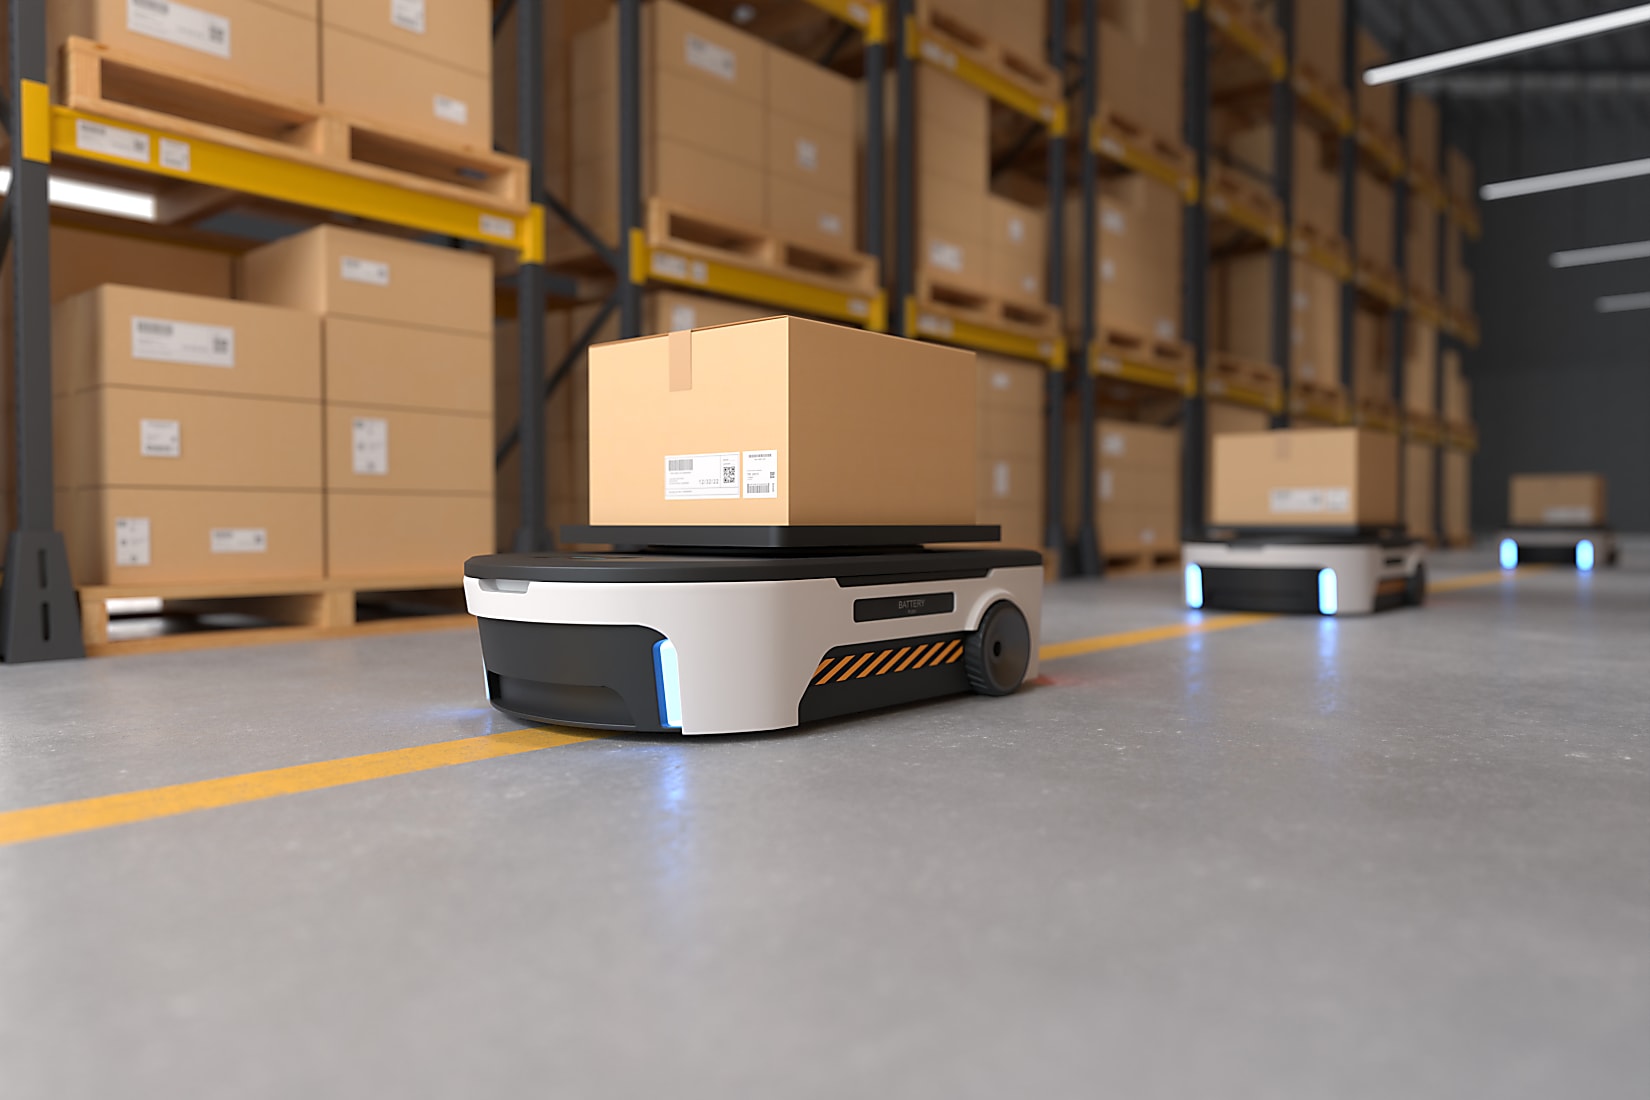 Warehouse-automation-solutions-agv-amr